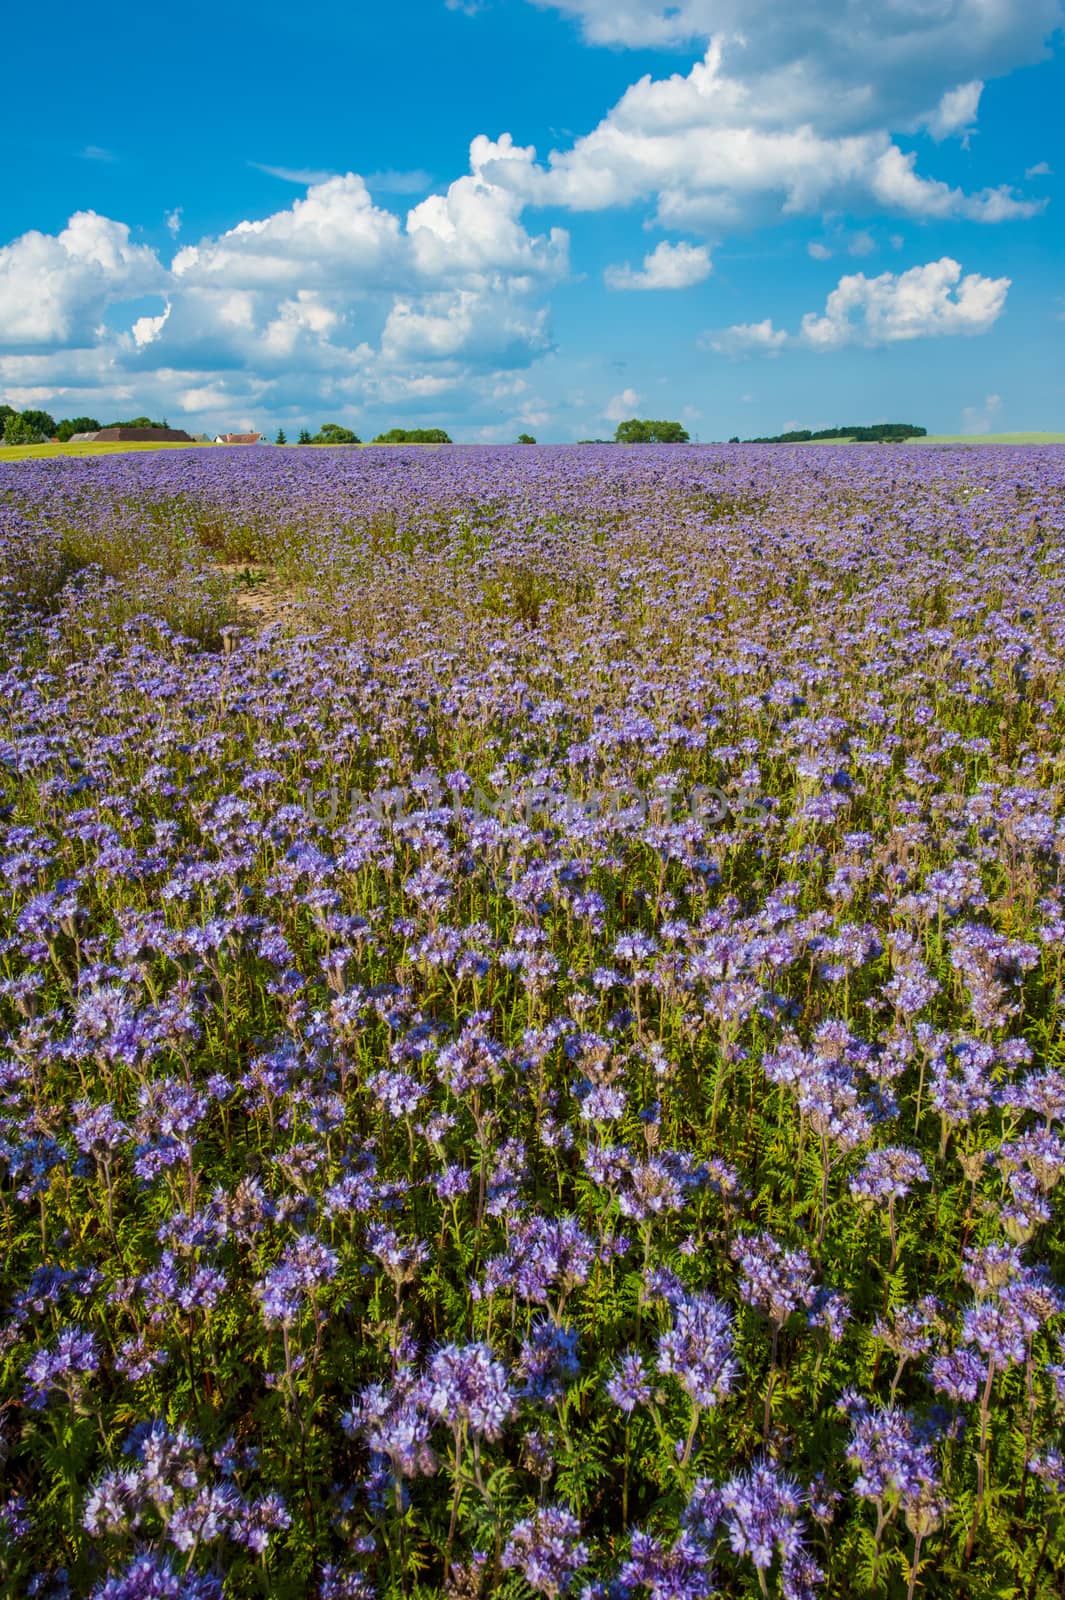 Field of blooming Lacy phacelia (Phacelia tanacetifolia) at a beautiful summer day